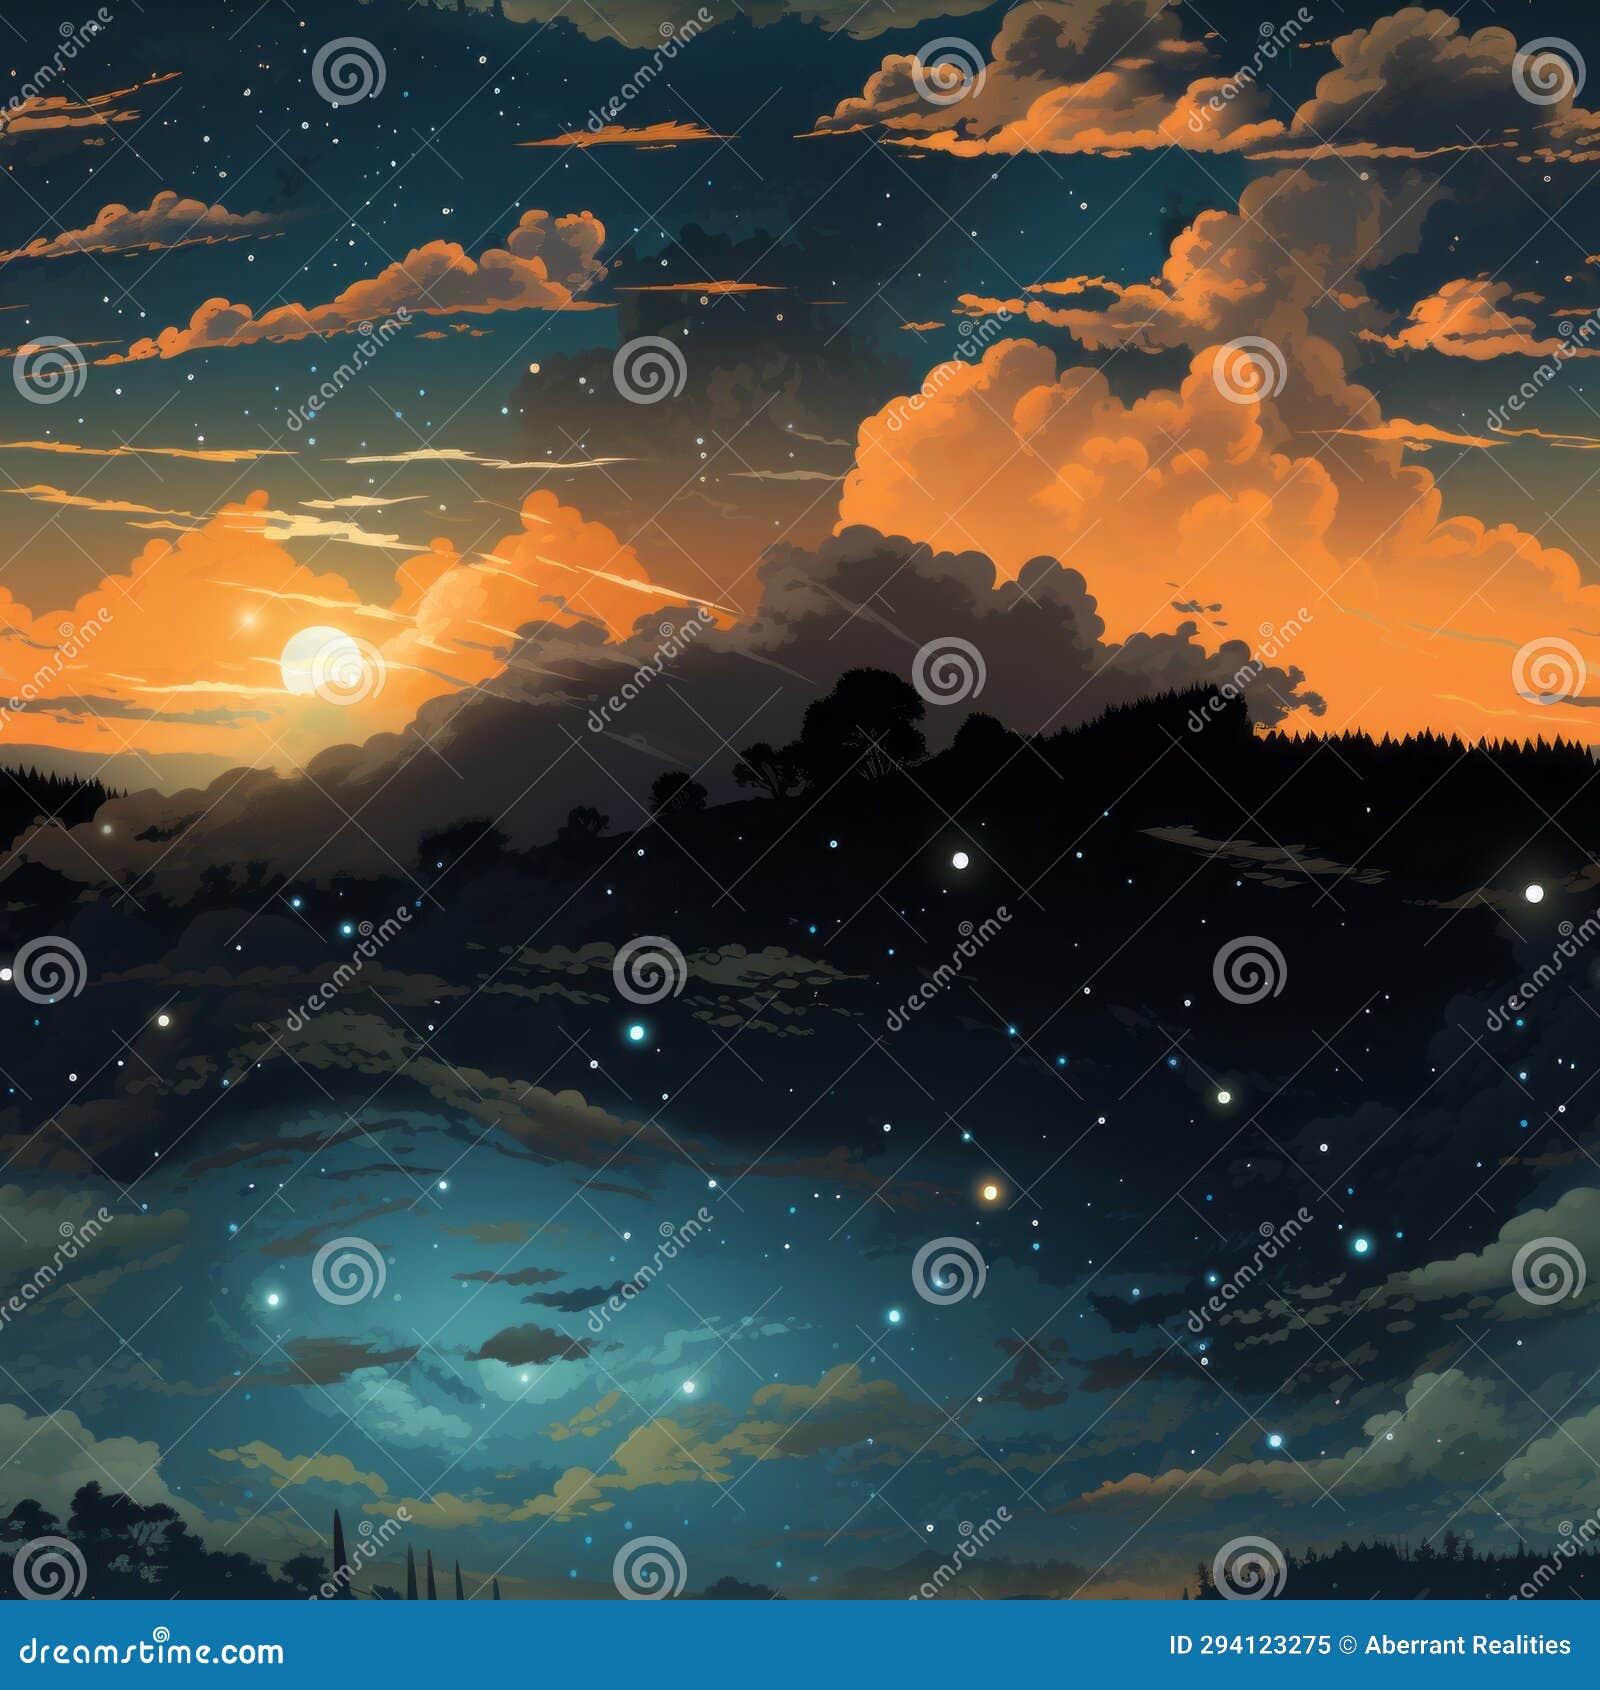 An Illustration of a Night Sky with Stars and Clouds Stock Illustration ...